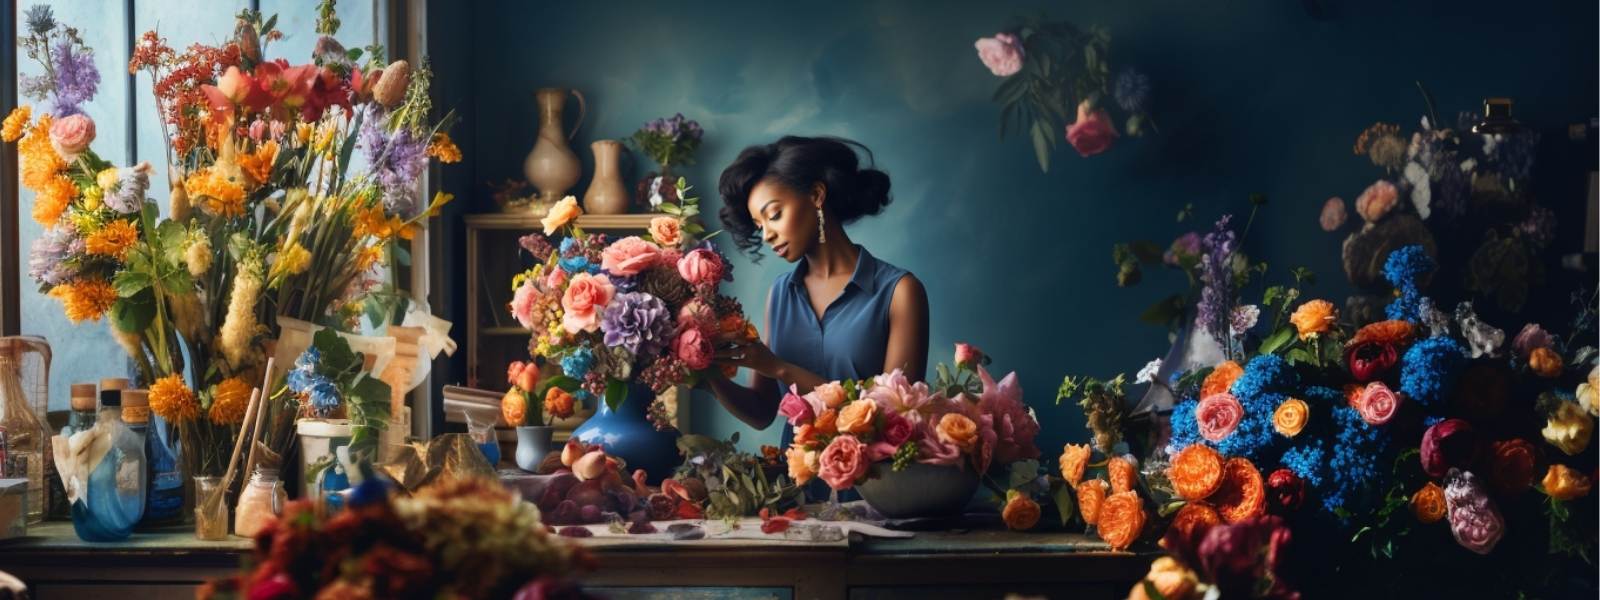 Artistic and vibrant image of a black florist in a blue flower shop surrounded by colourful flowers - Fabulous Flowers